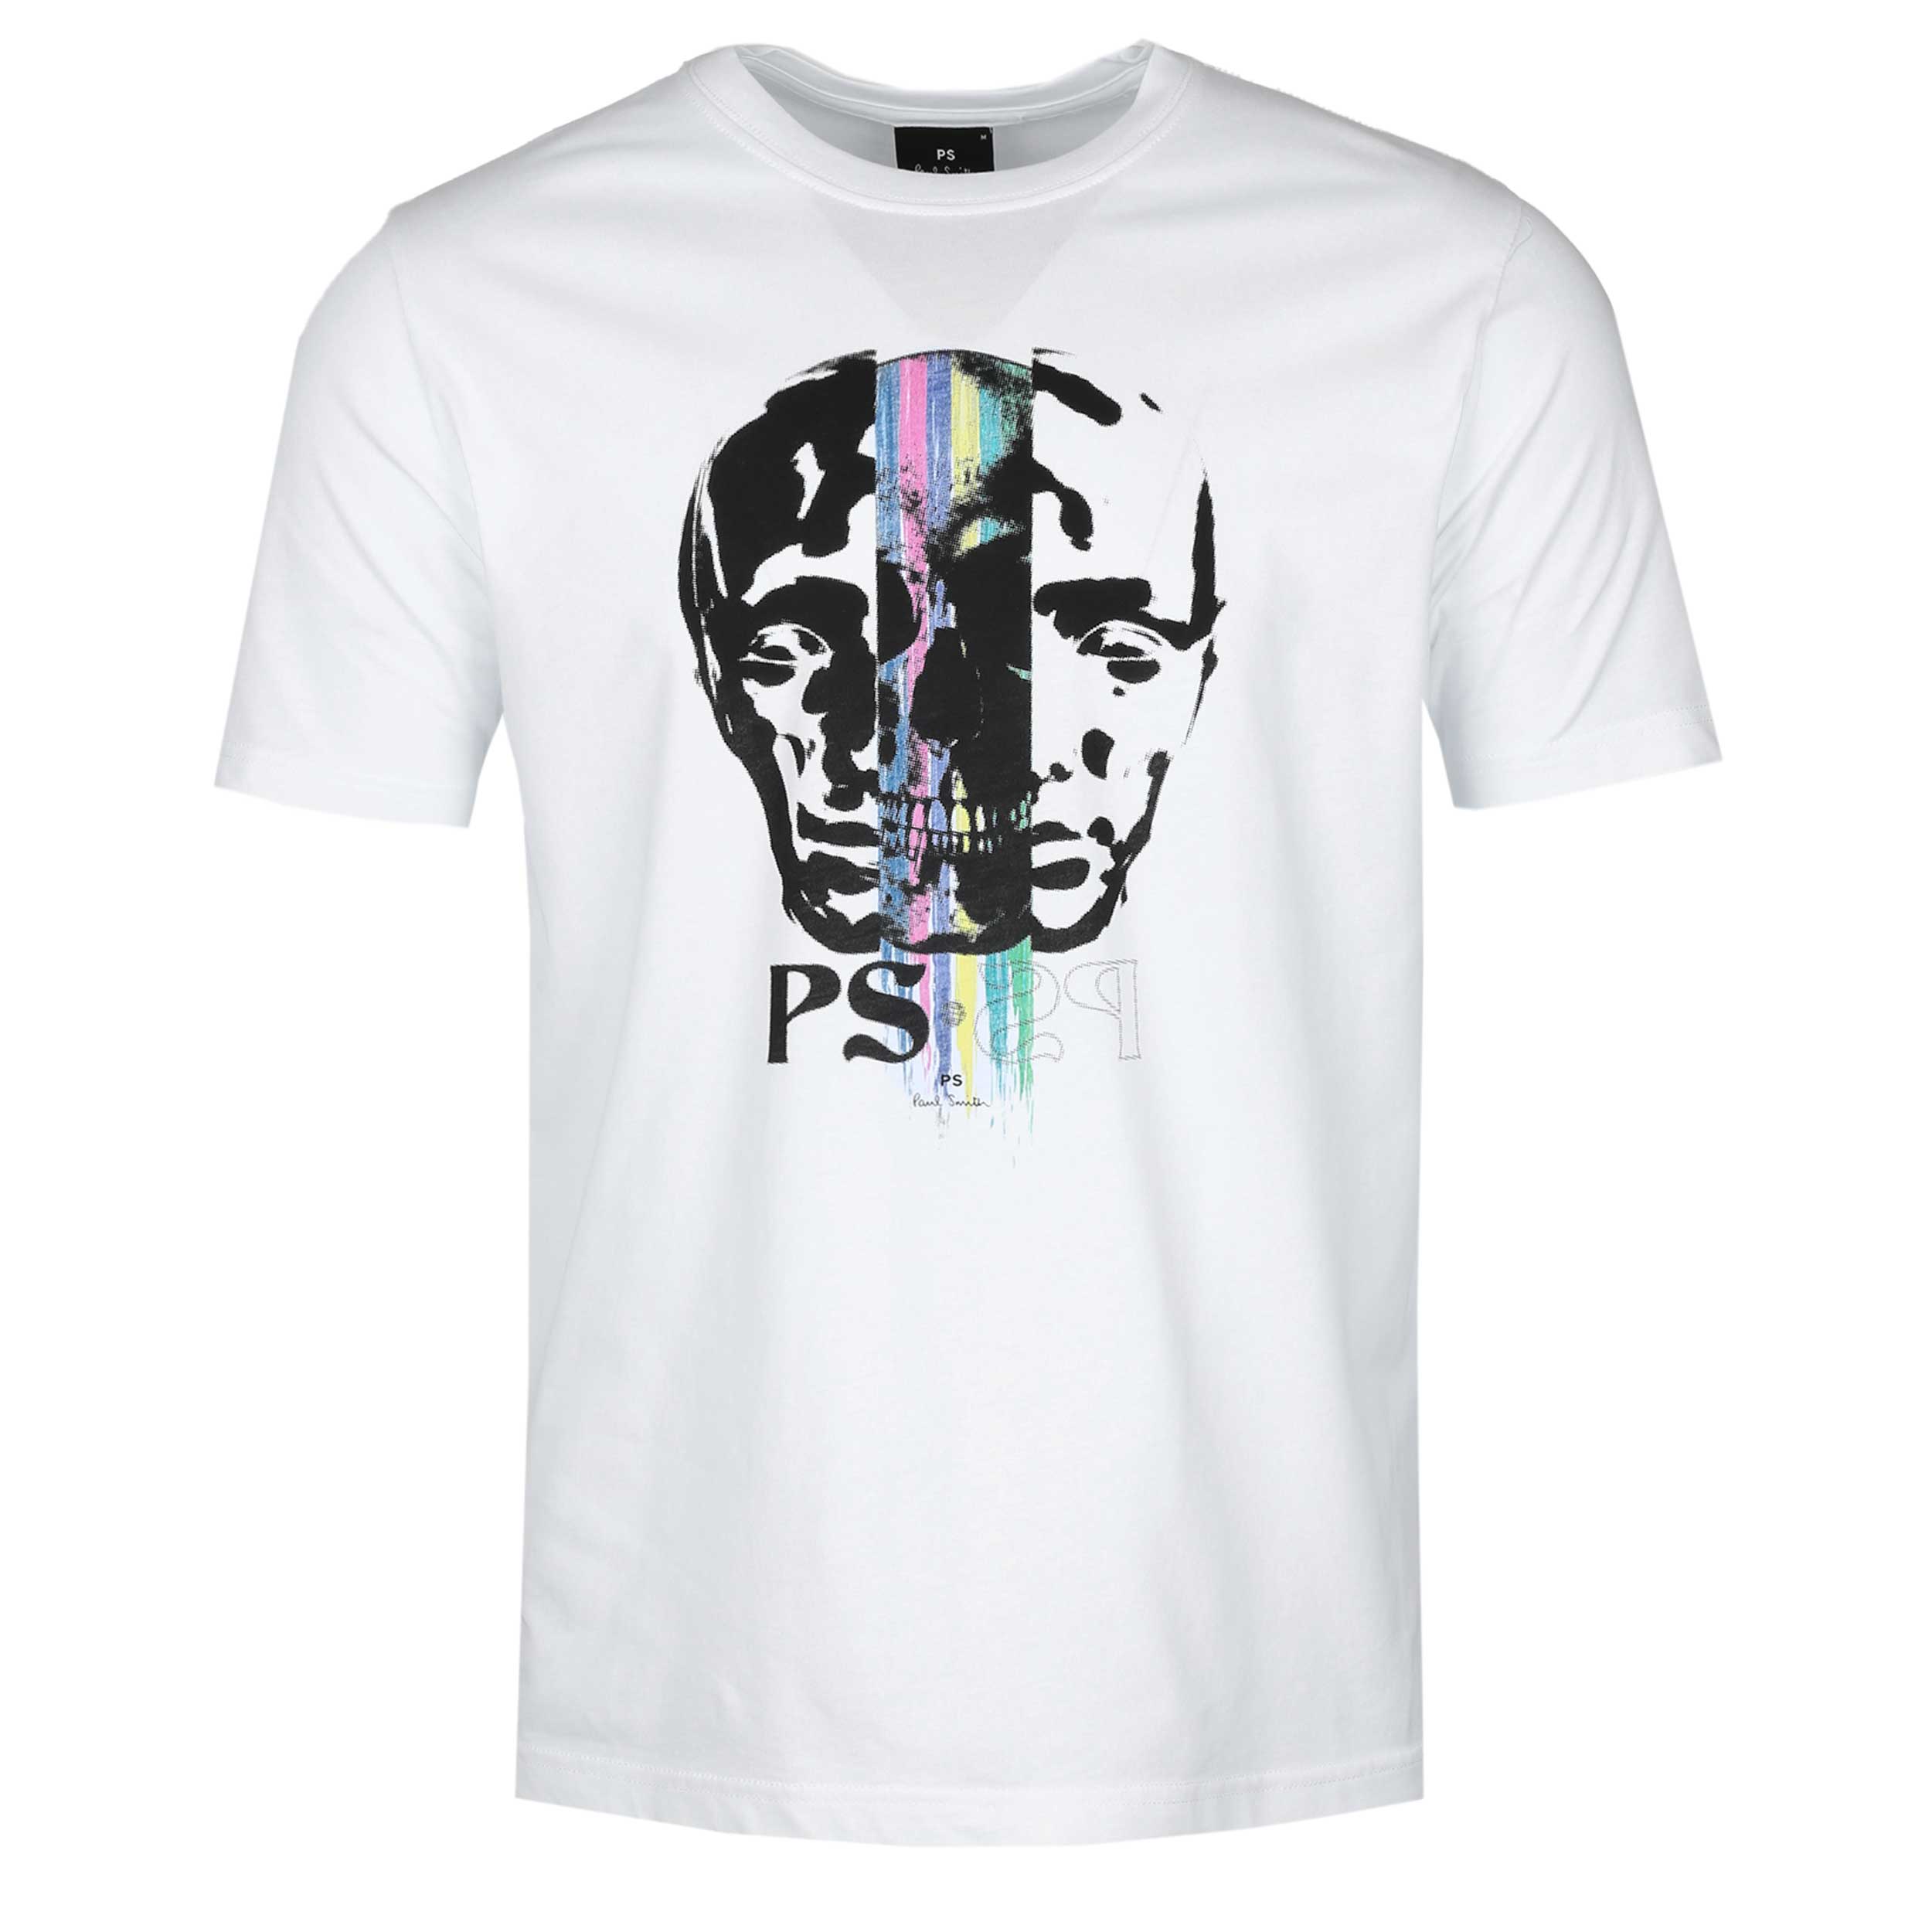 Paul Smith Opposite Faces T Shirt in White